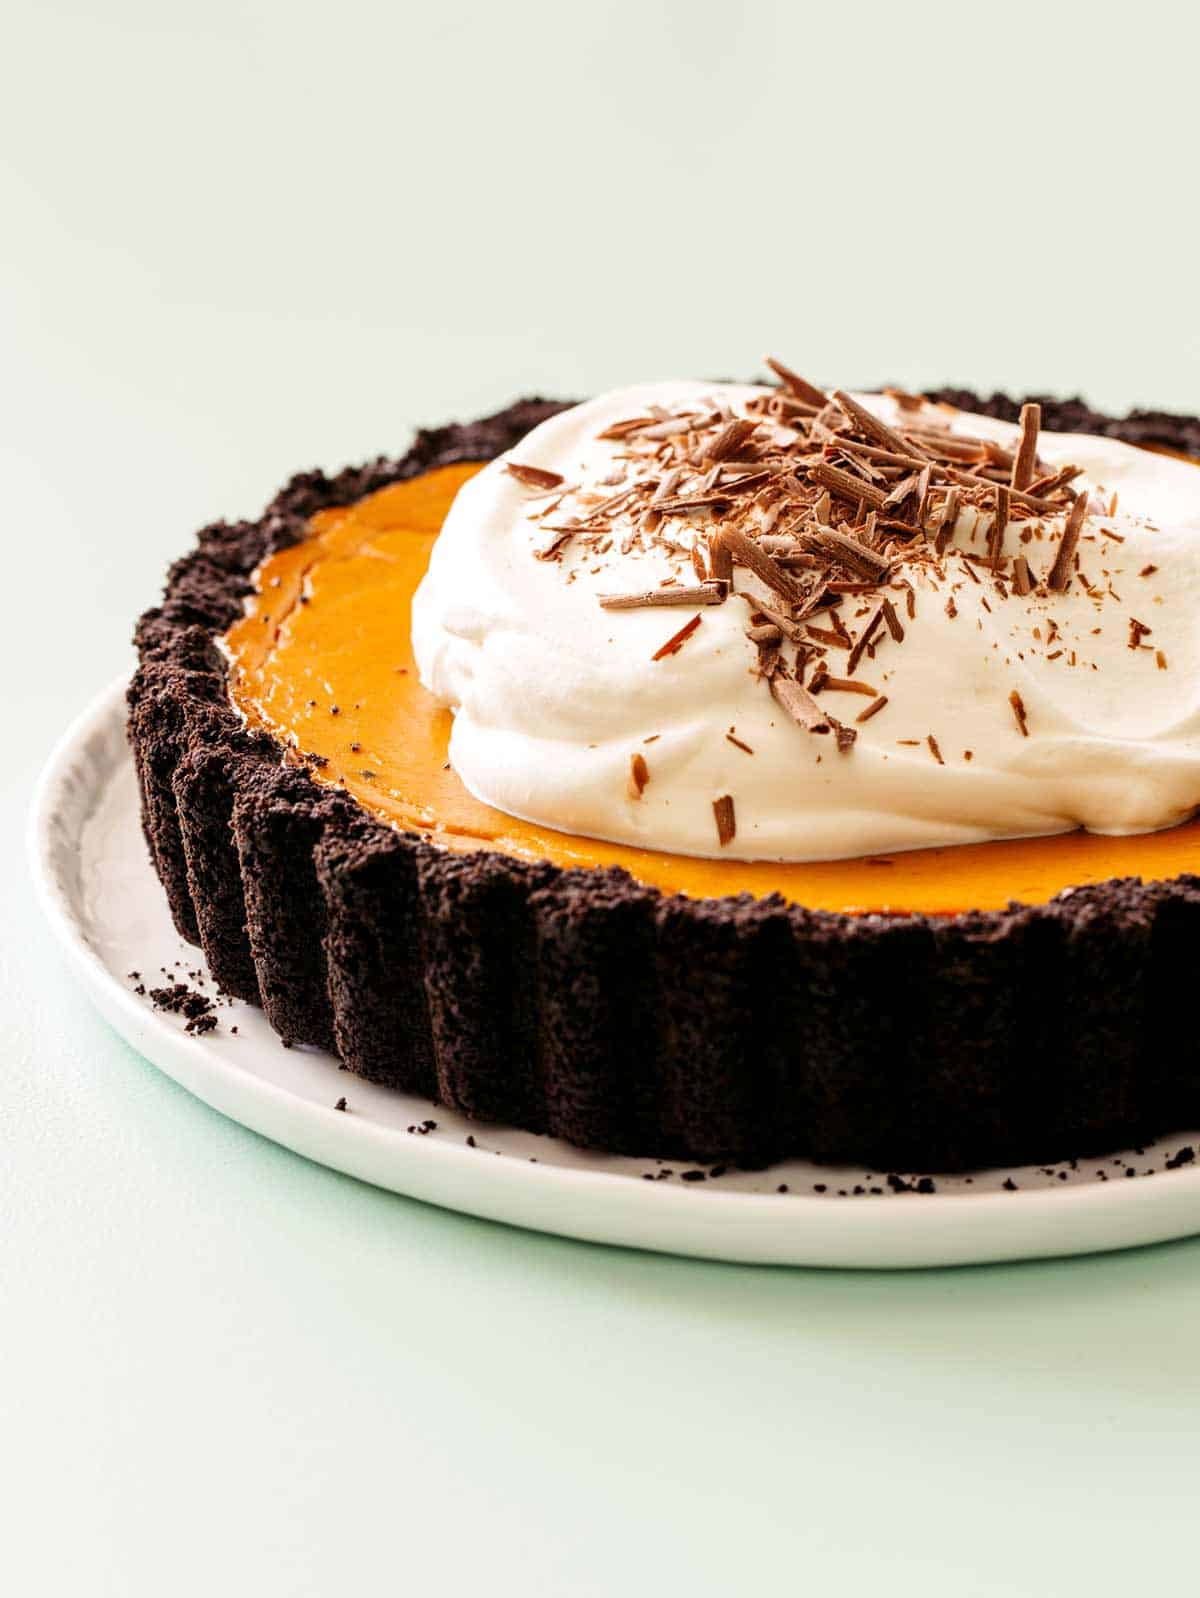 A close up of a whole pumpkin pie with chocolate crust, whipped cream, and chocolate shavings.